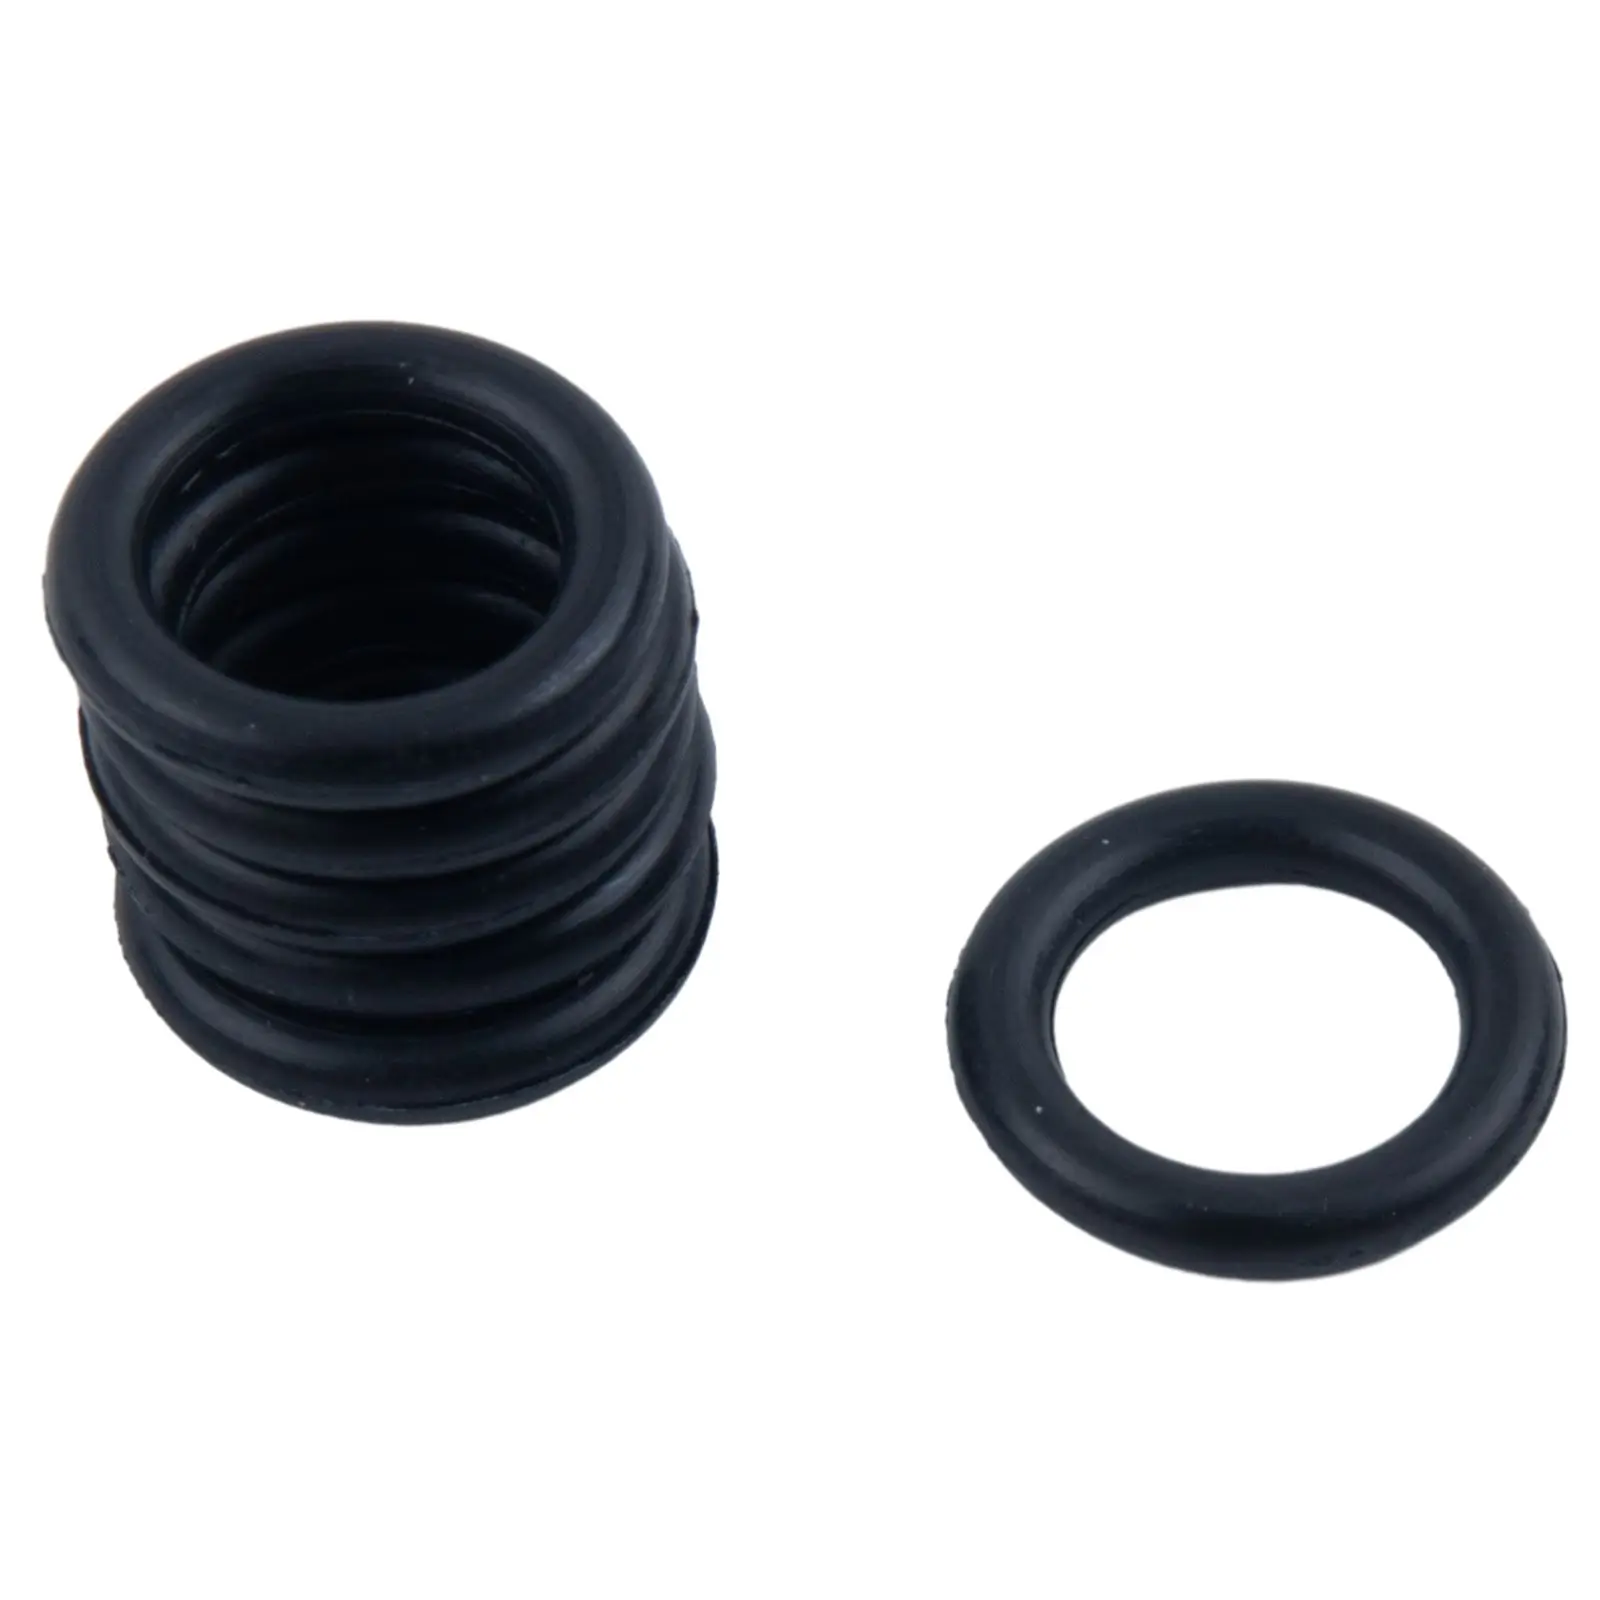 

3/8 O-Rings Kit Set Tool Fixtures Garden Parts Replacement Rubber Spare Accessories Durable For Pressure Washer